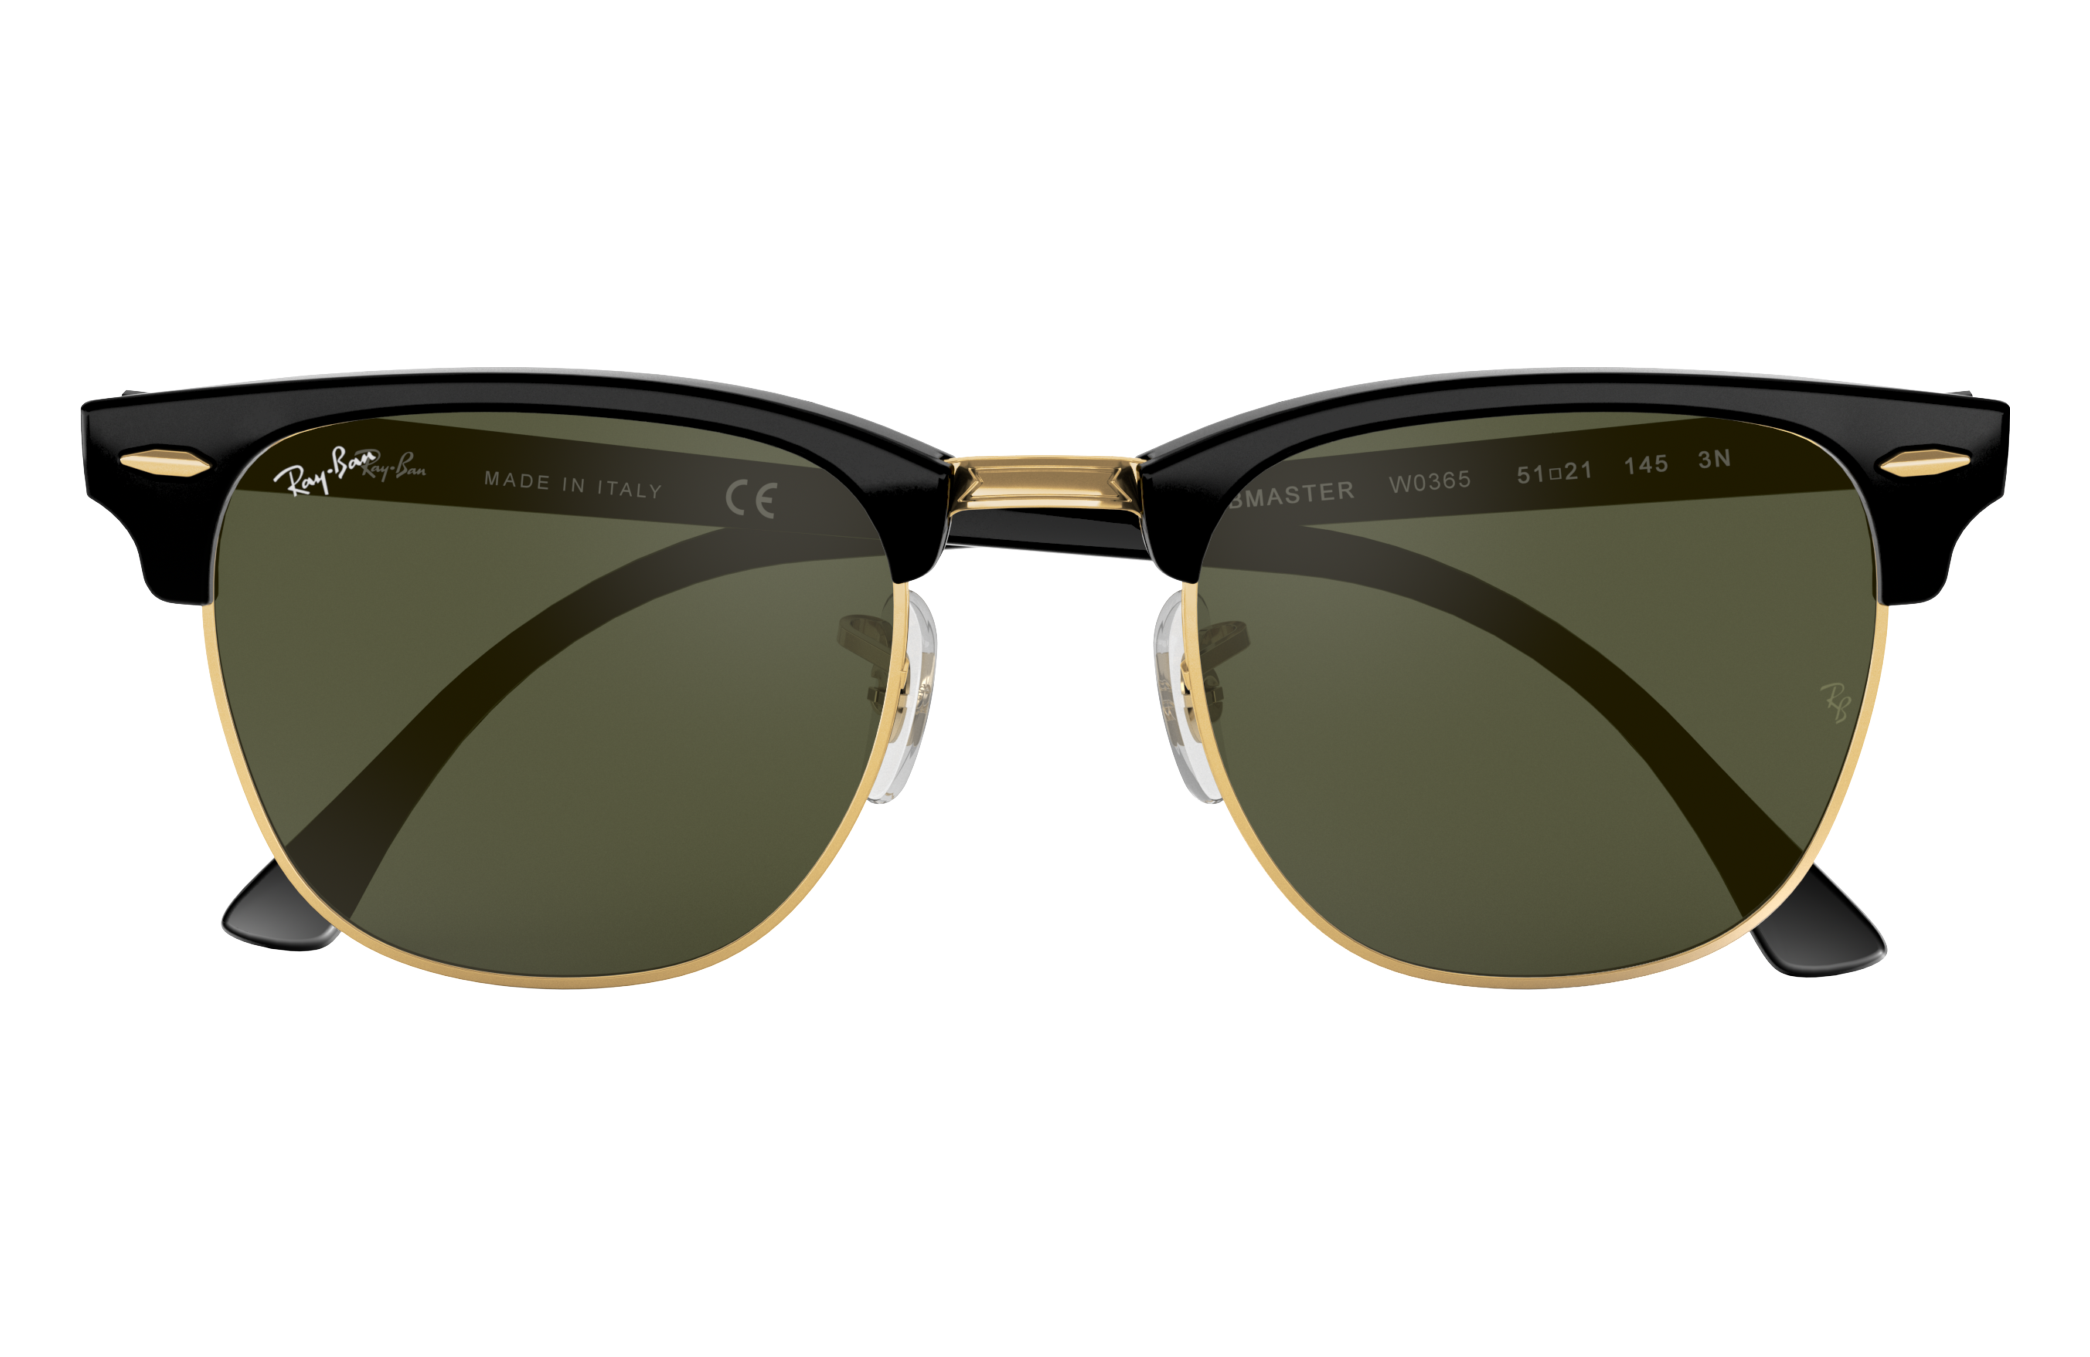 Ray-Ban Clubmaster Classic RB3016 Black 